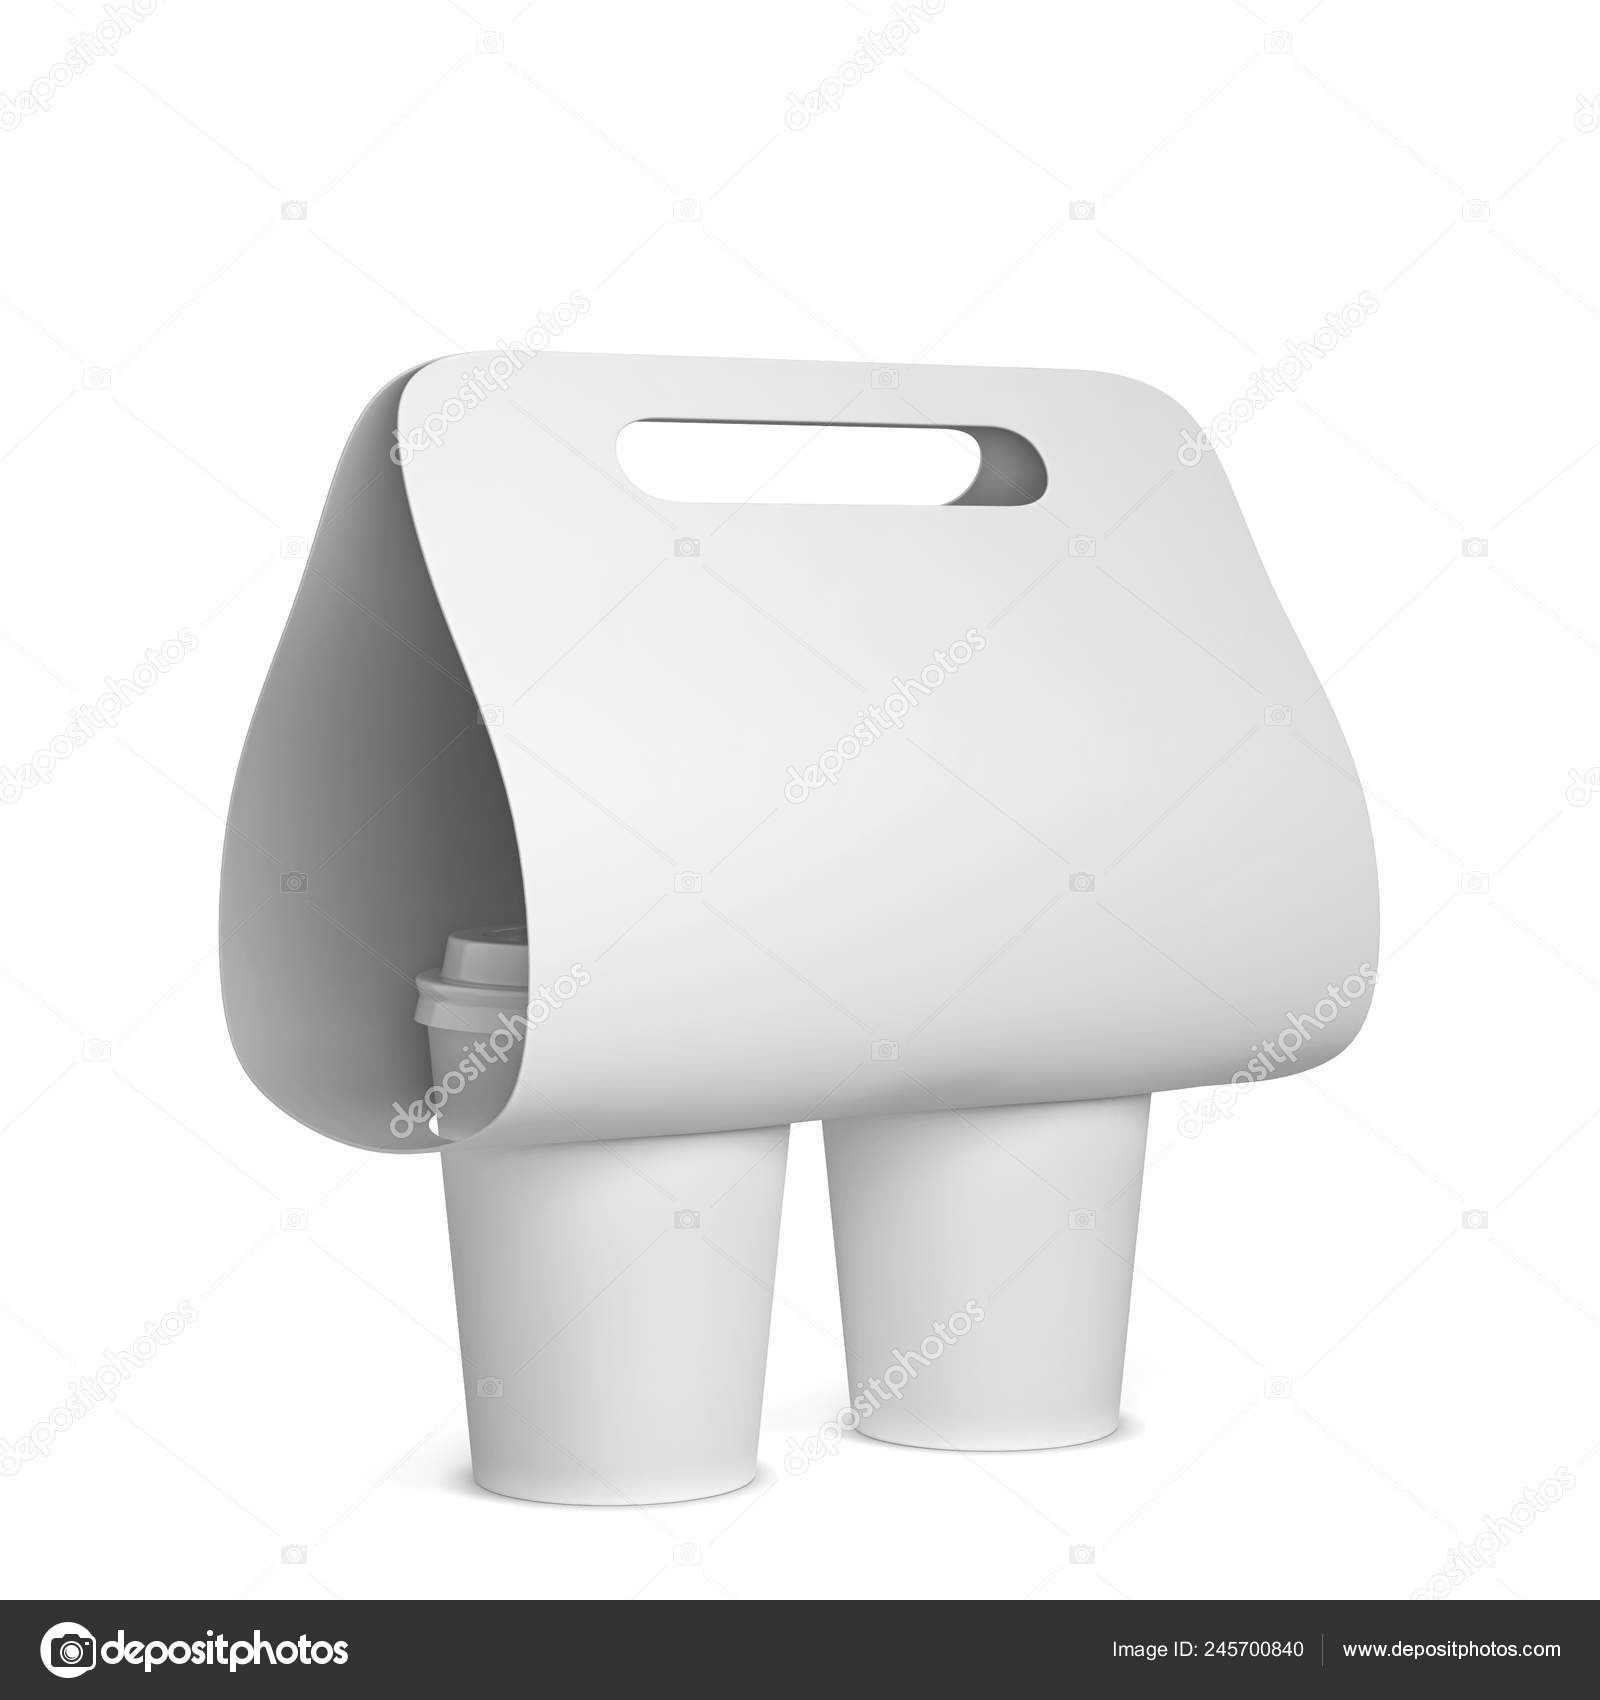 Coffee cup holder Vectors & Illustrations for Free Download